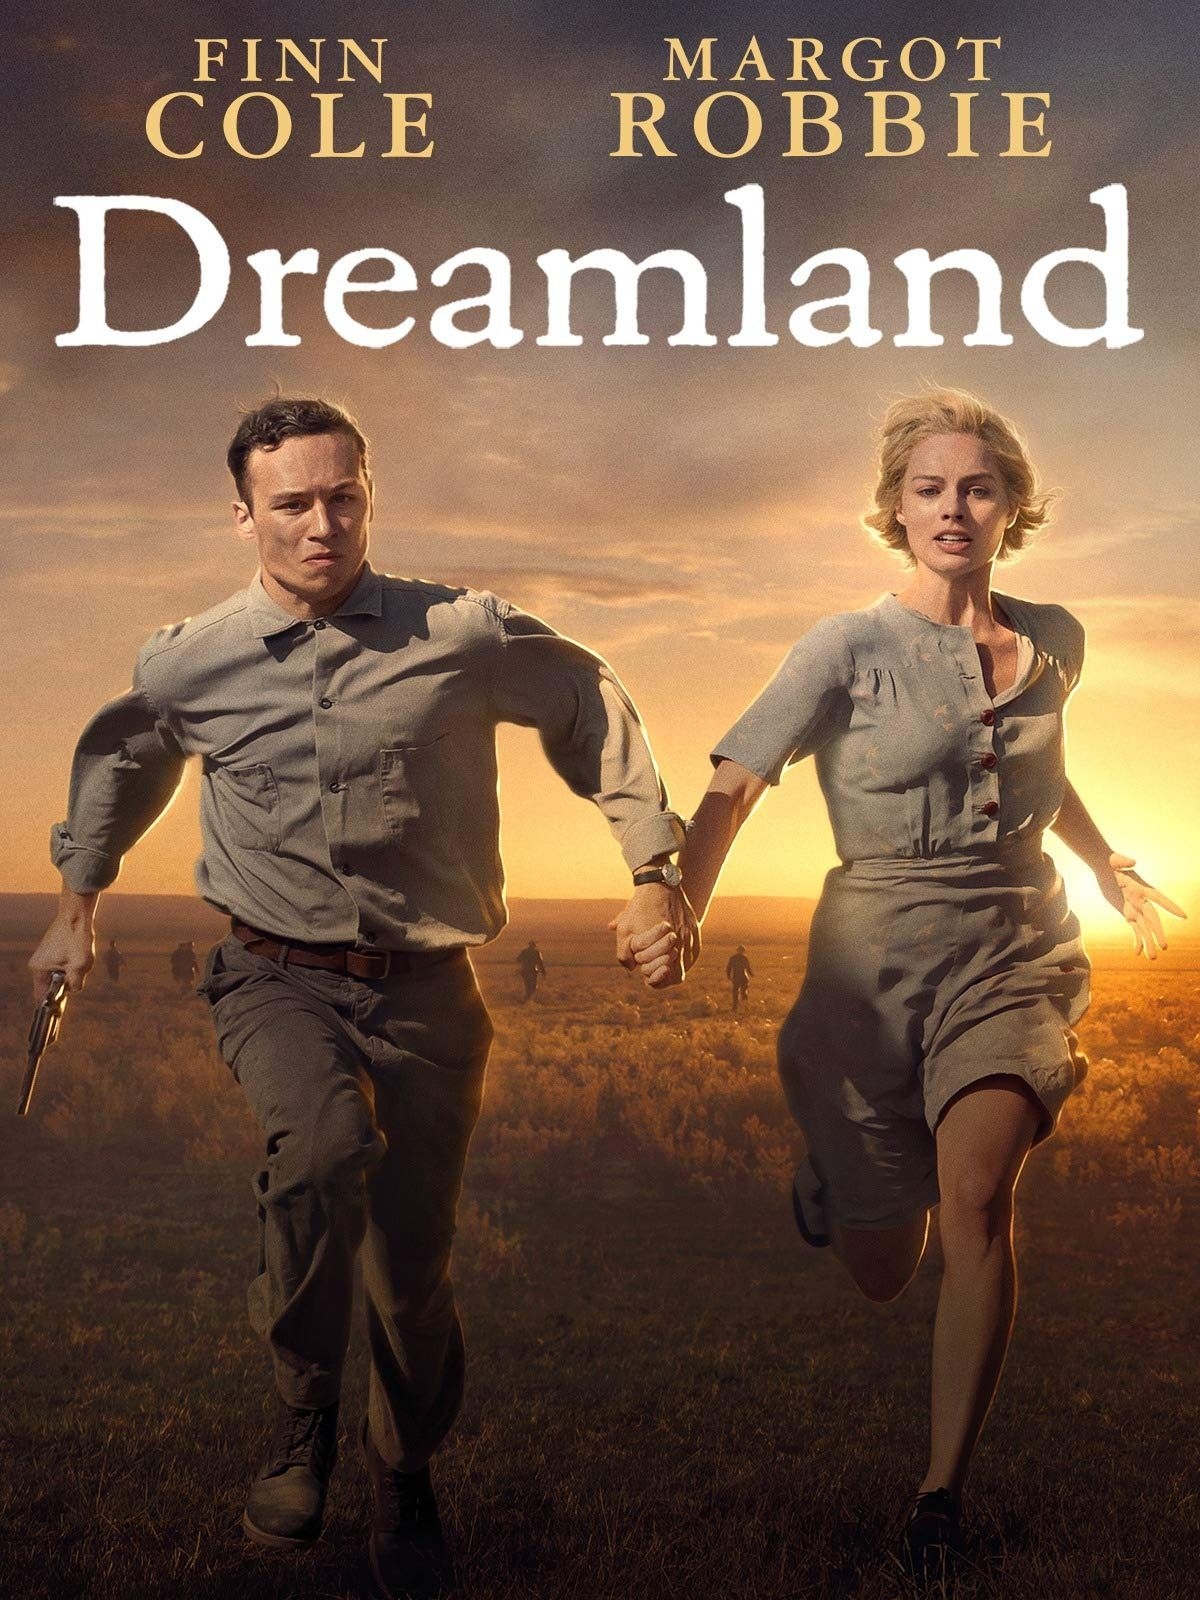 Watch Movie Dreamland Online Streaming for free